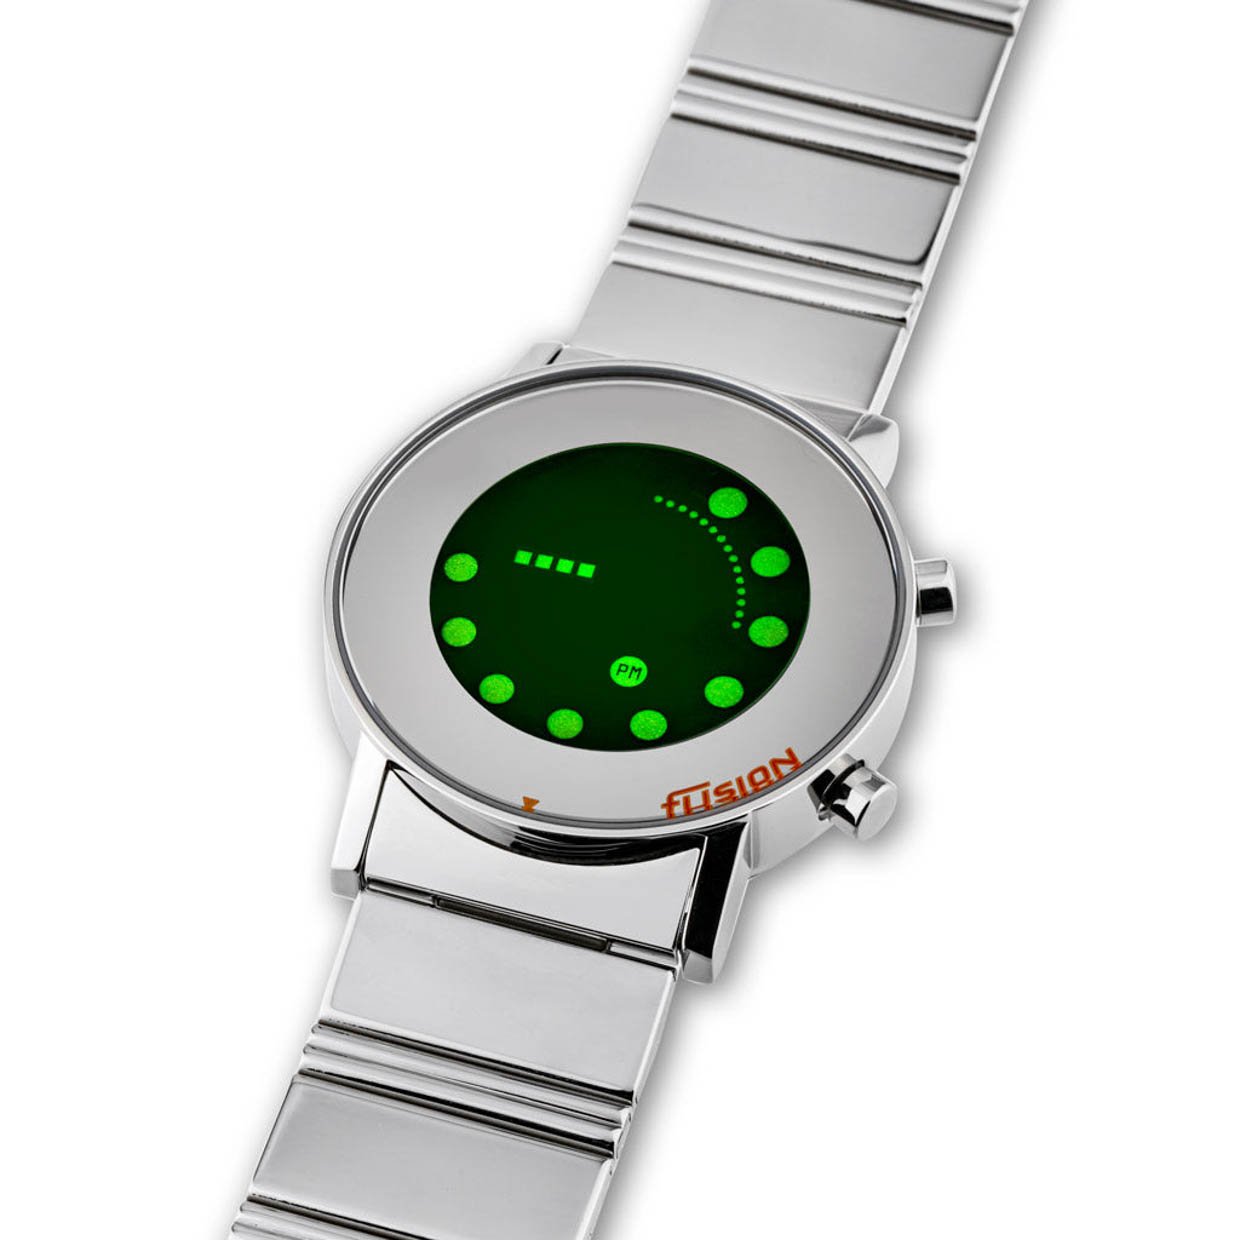 TokyoFlash Fusion LCD Watch